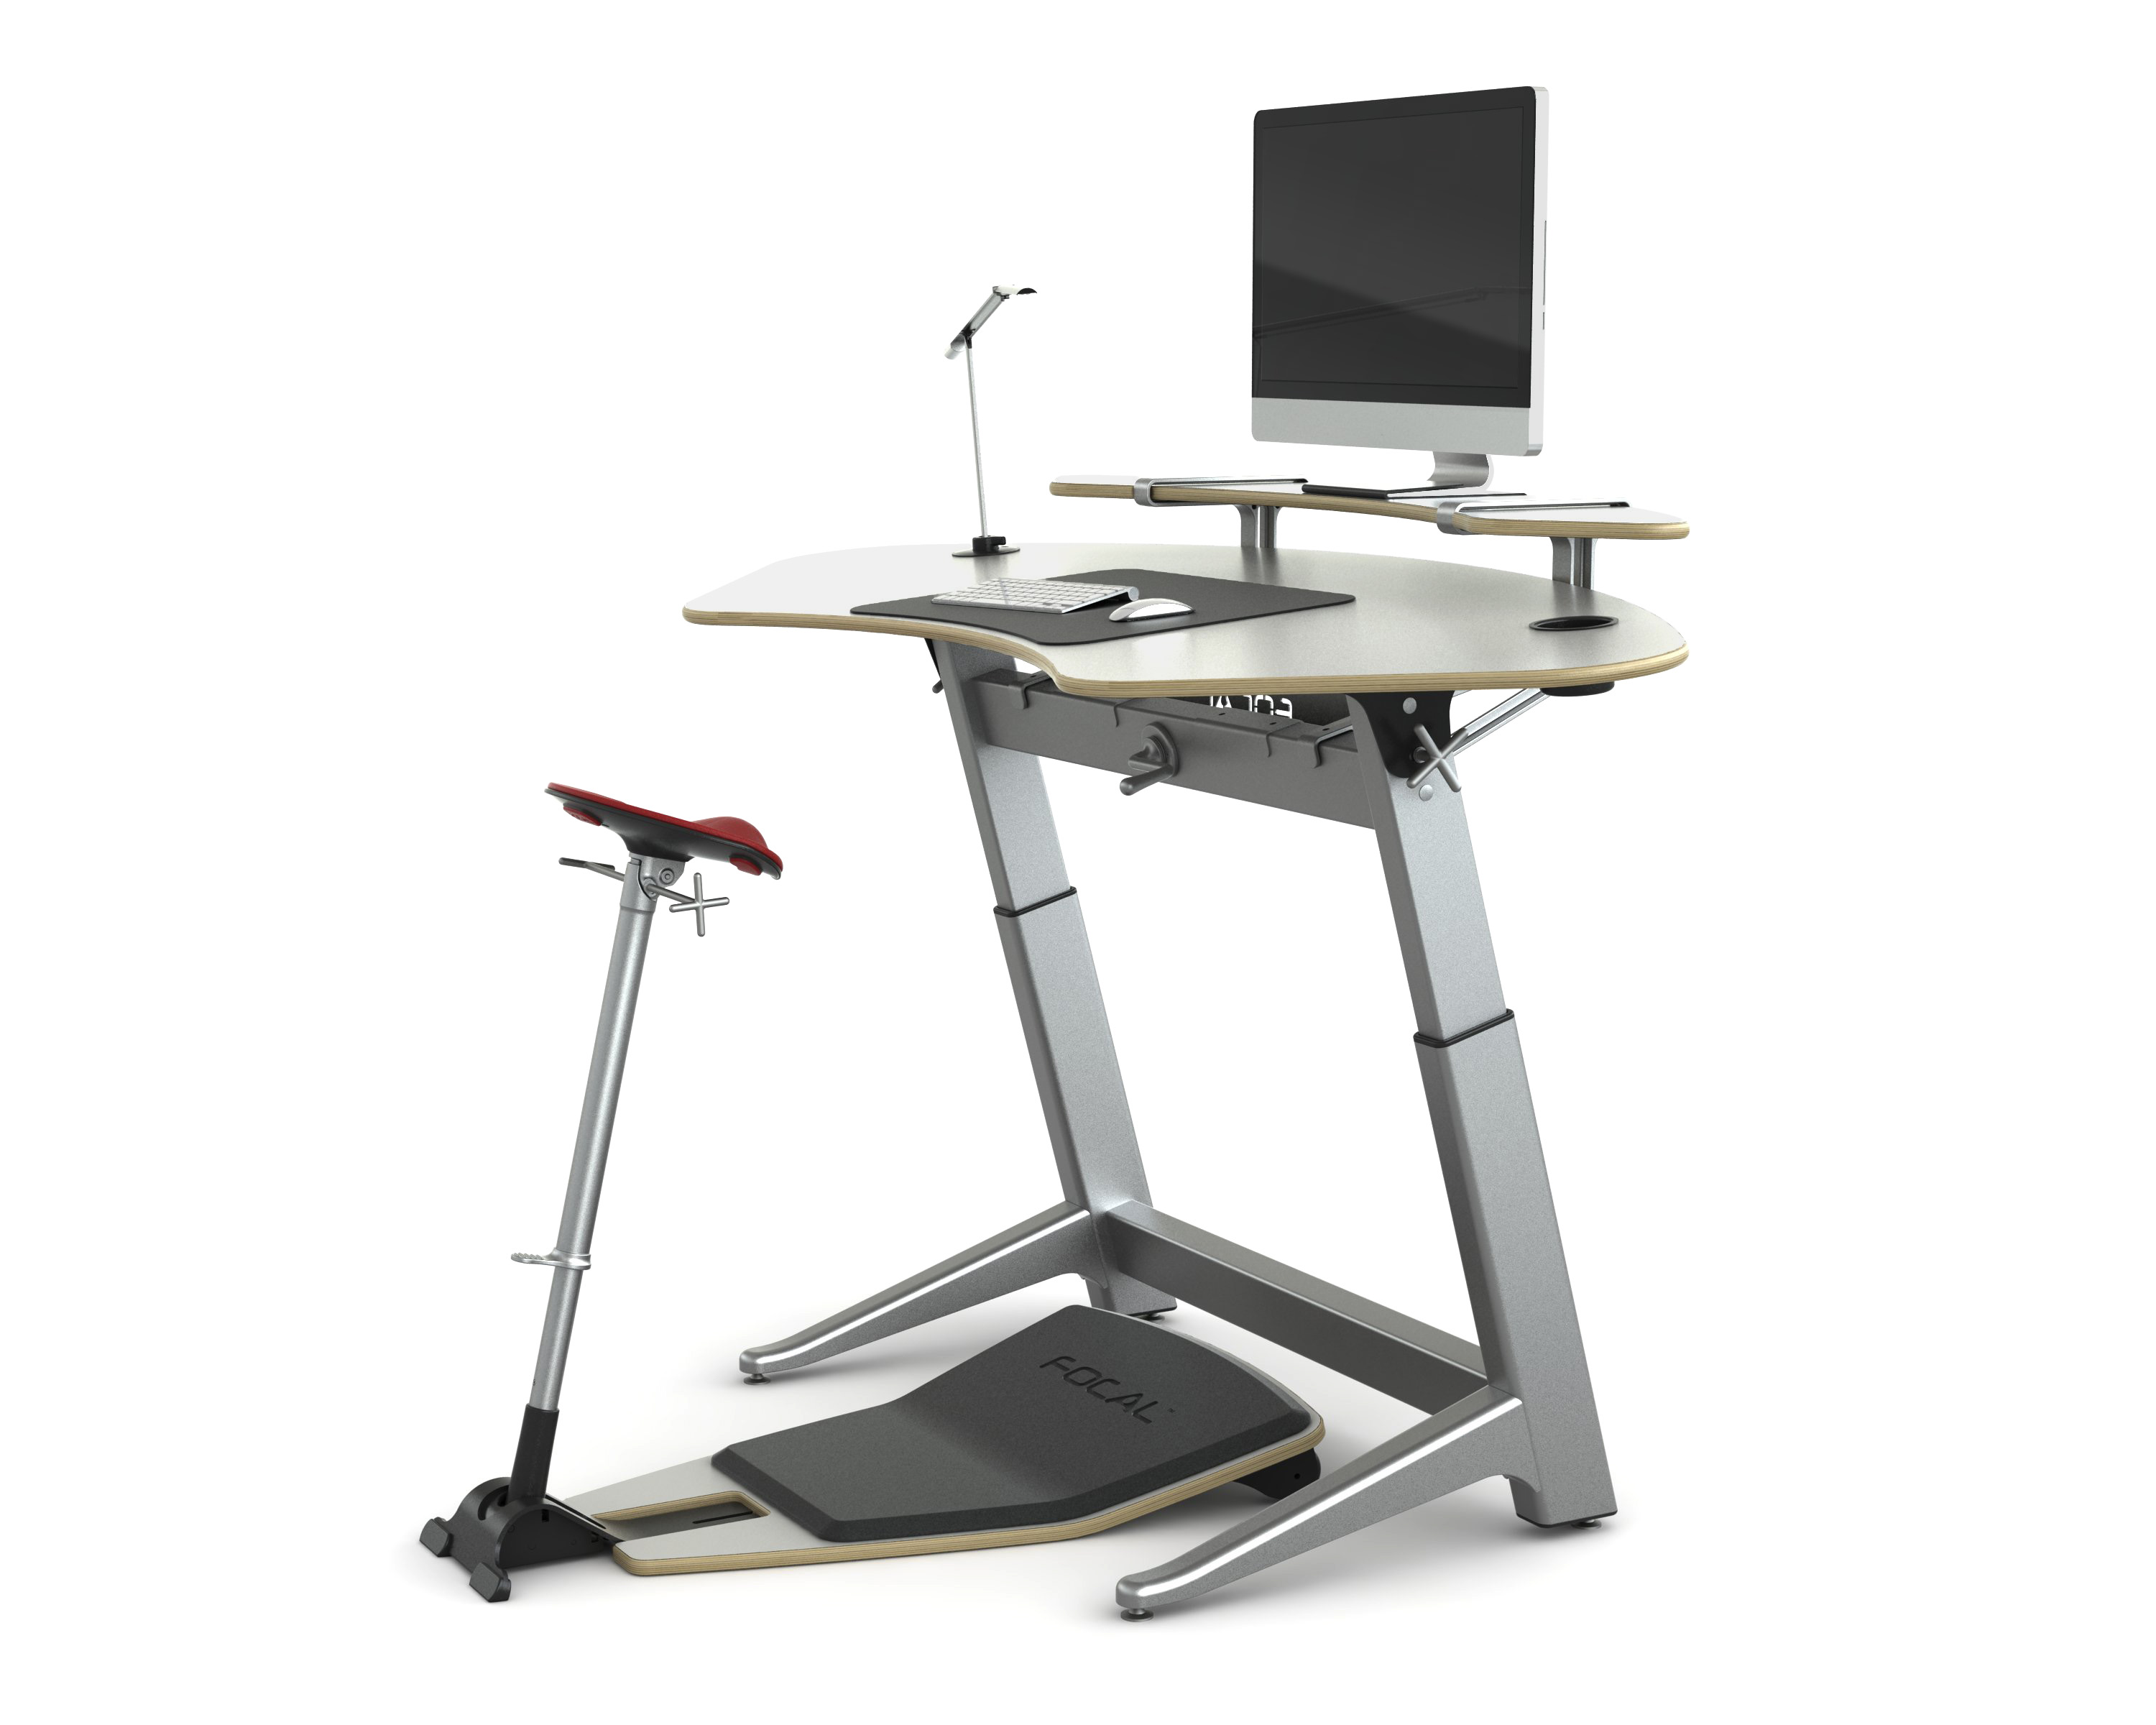 Focal Upright's Sphere Workstation - Workplace Wellness 2.0